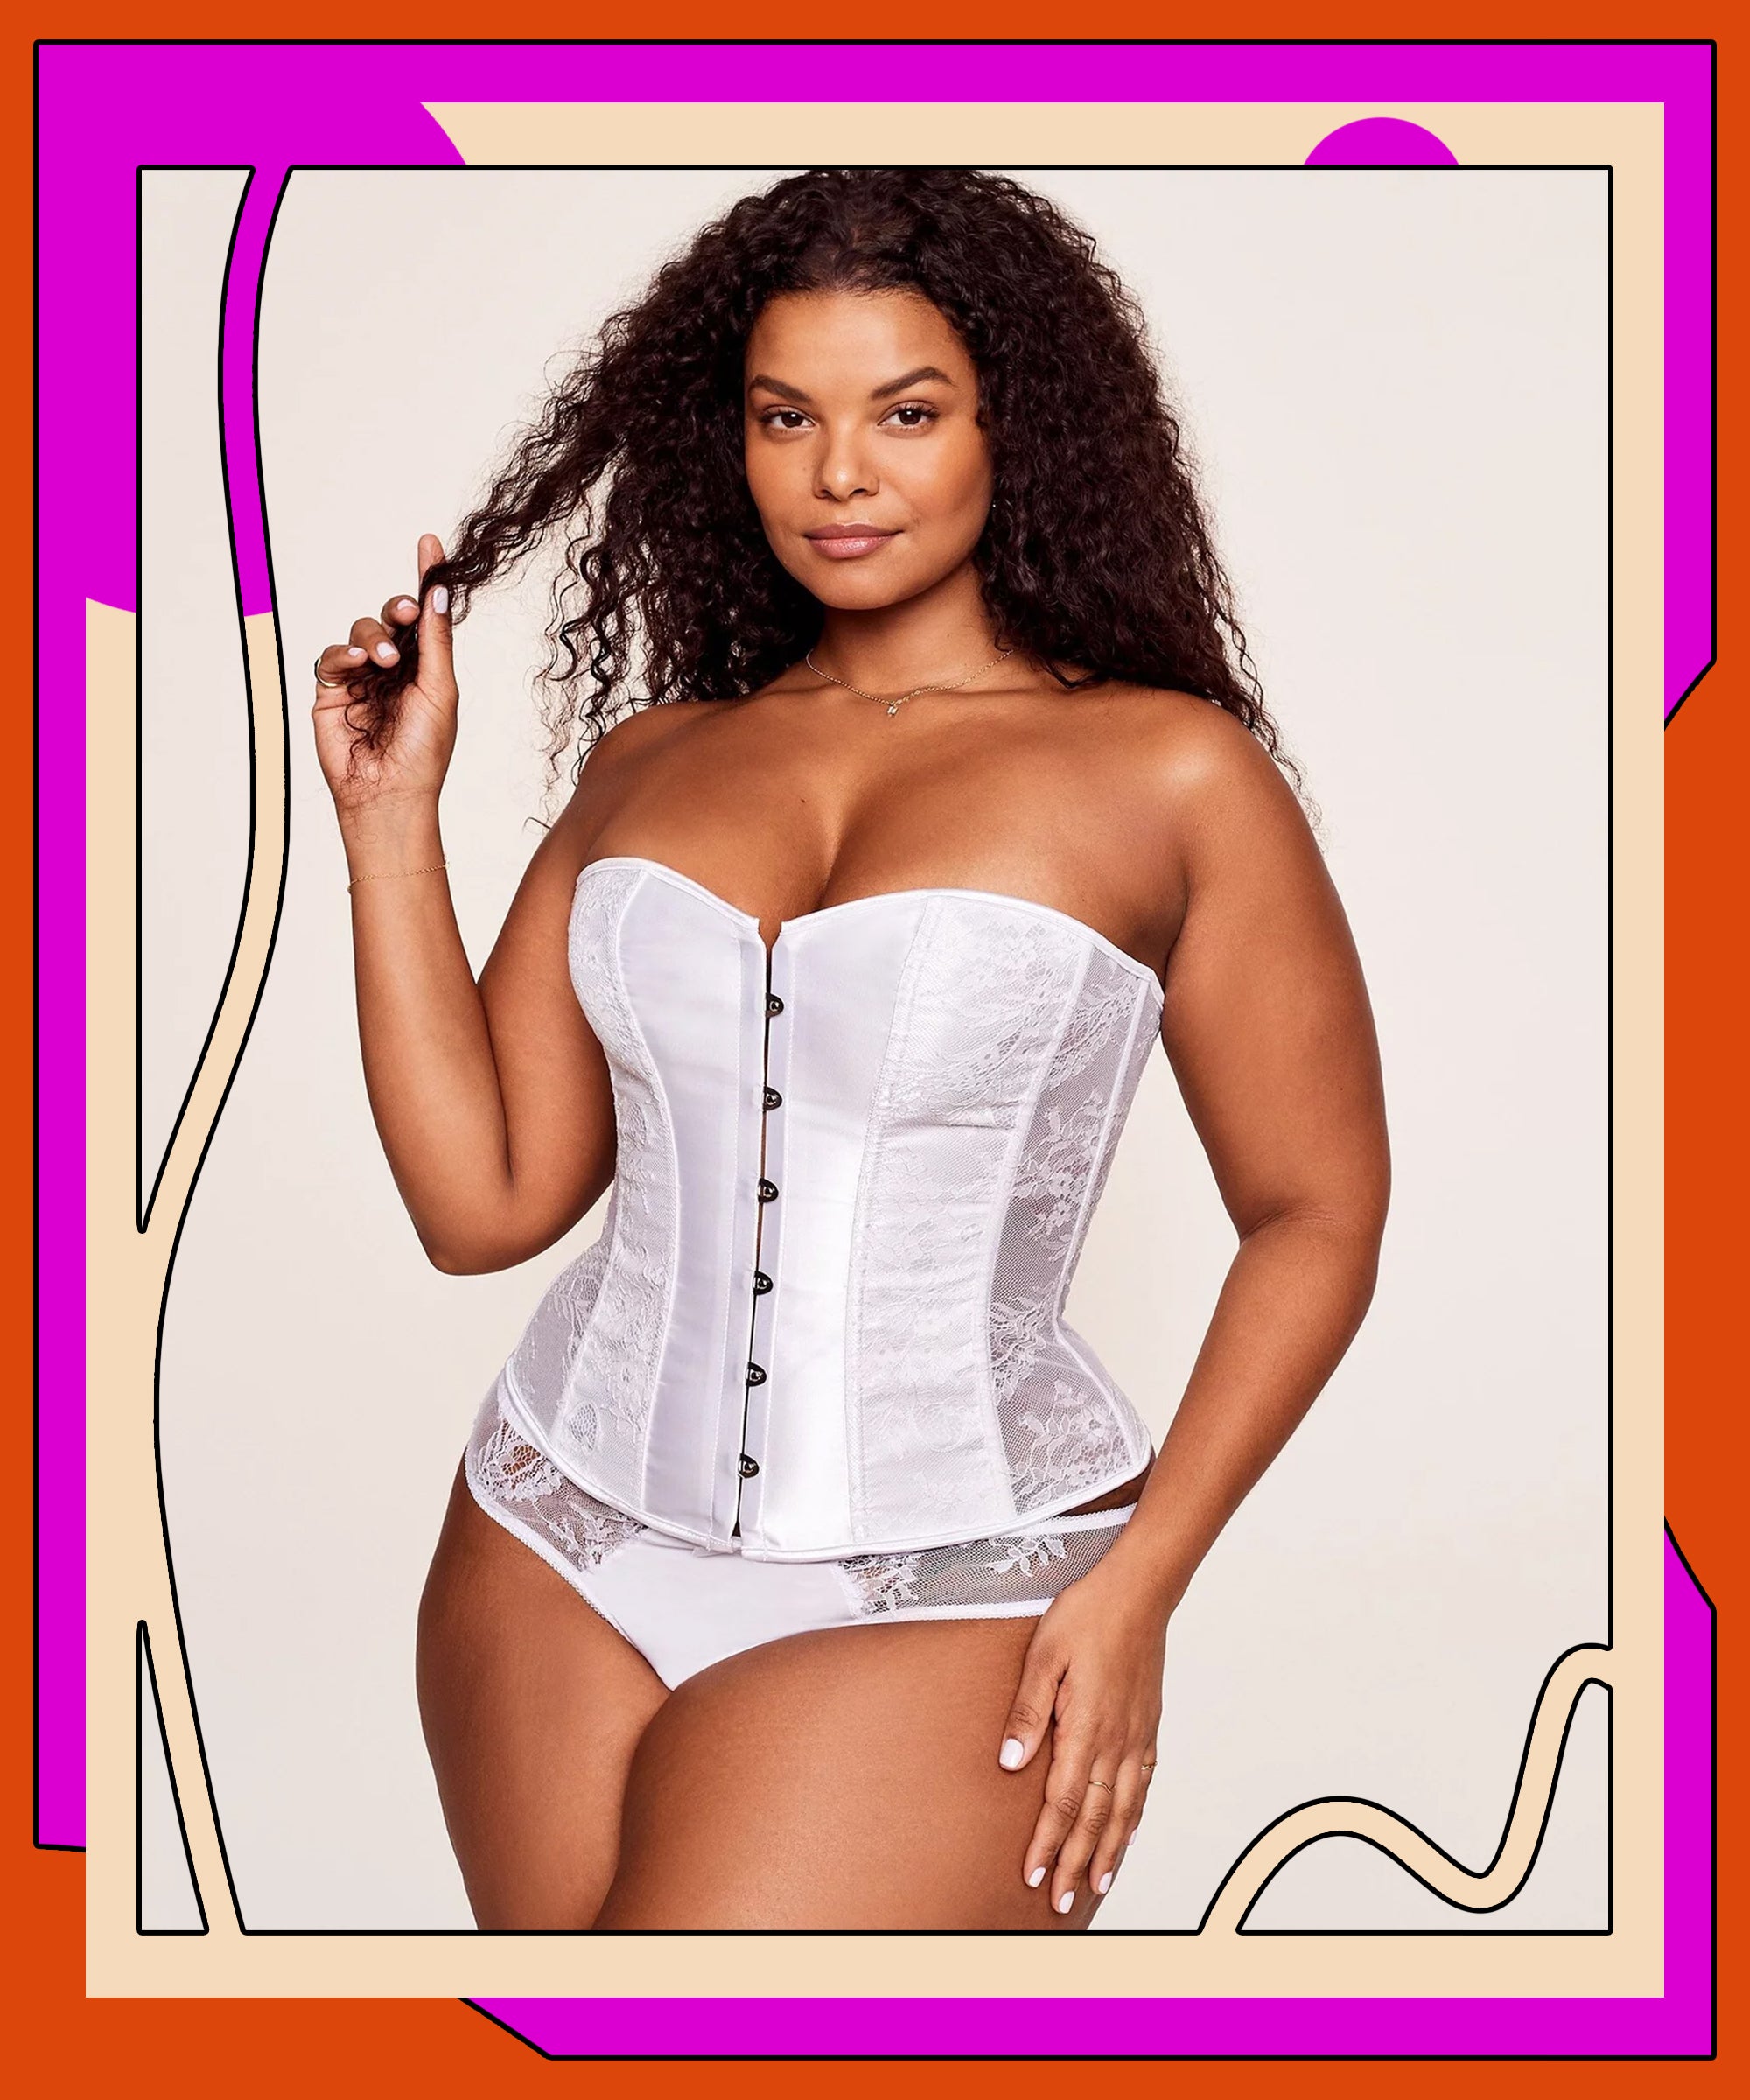 Classic Lace-up Corsets For Women - Power Day Sale